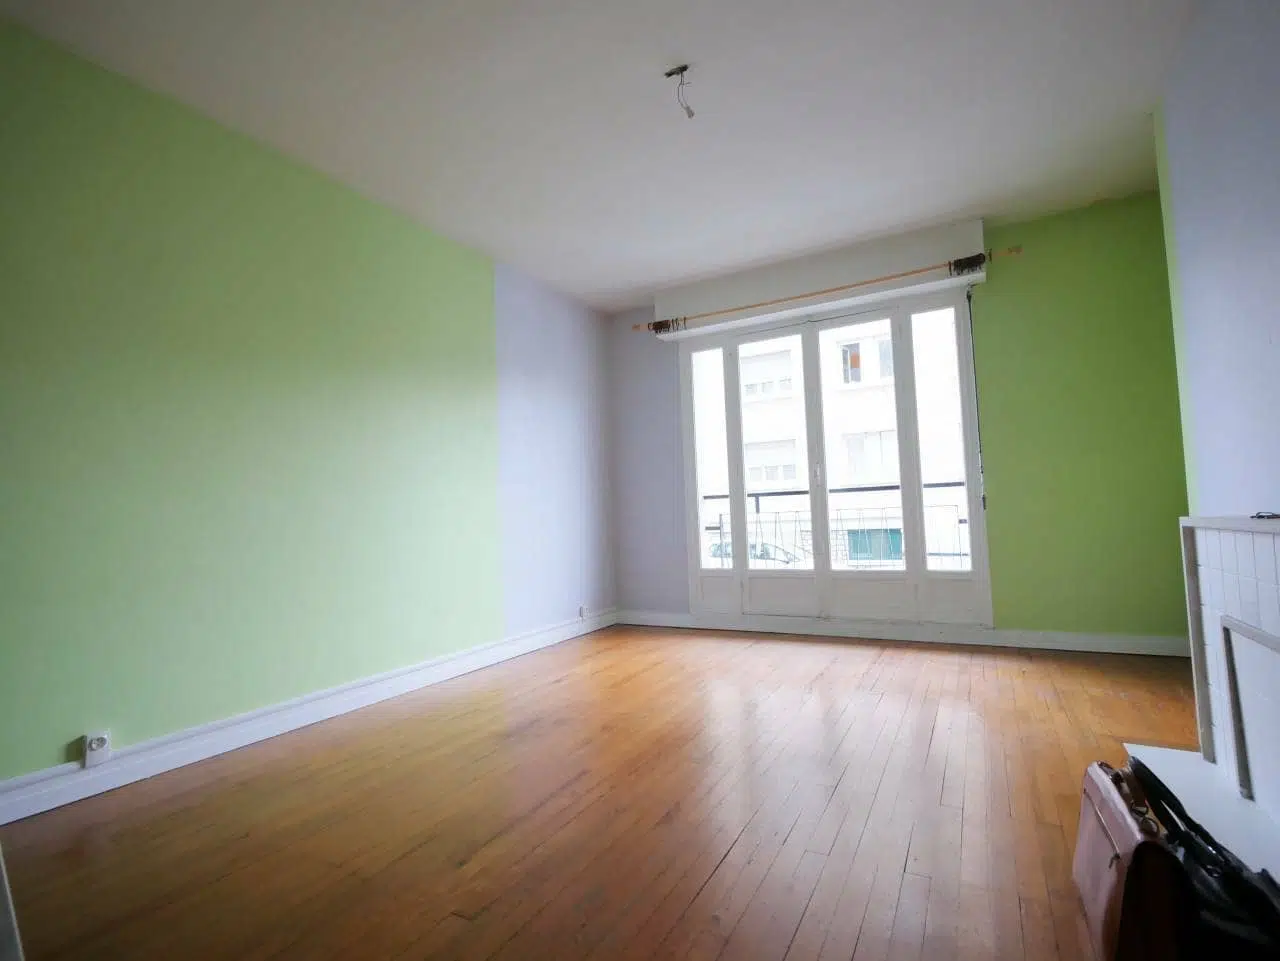 Location Appartement type F2 Le Havre 286